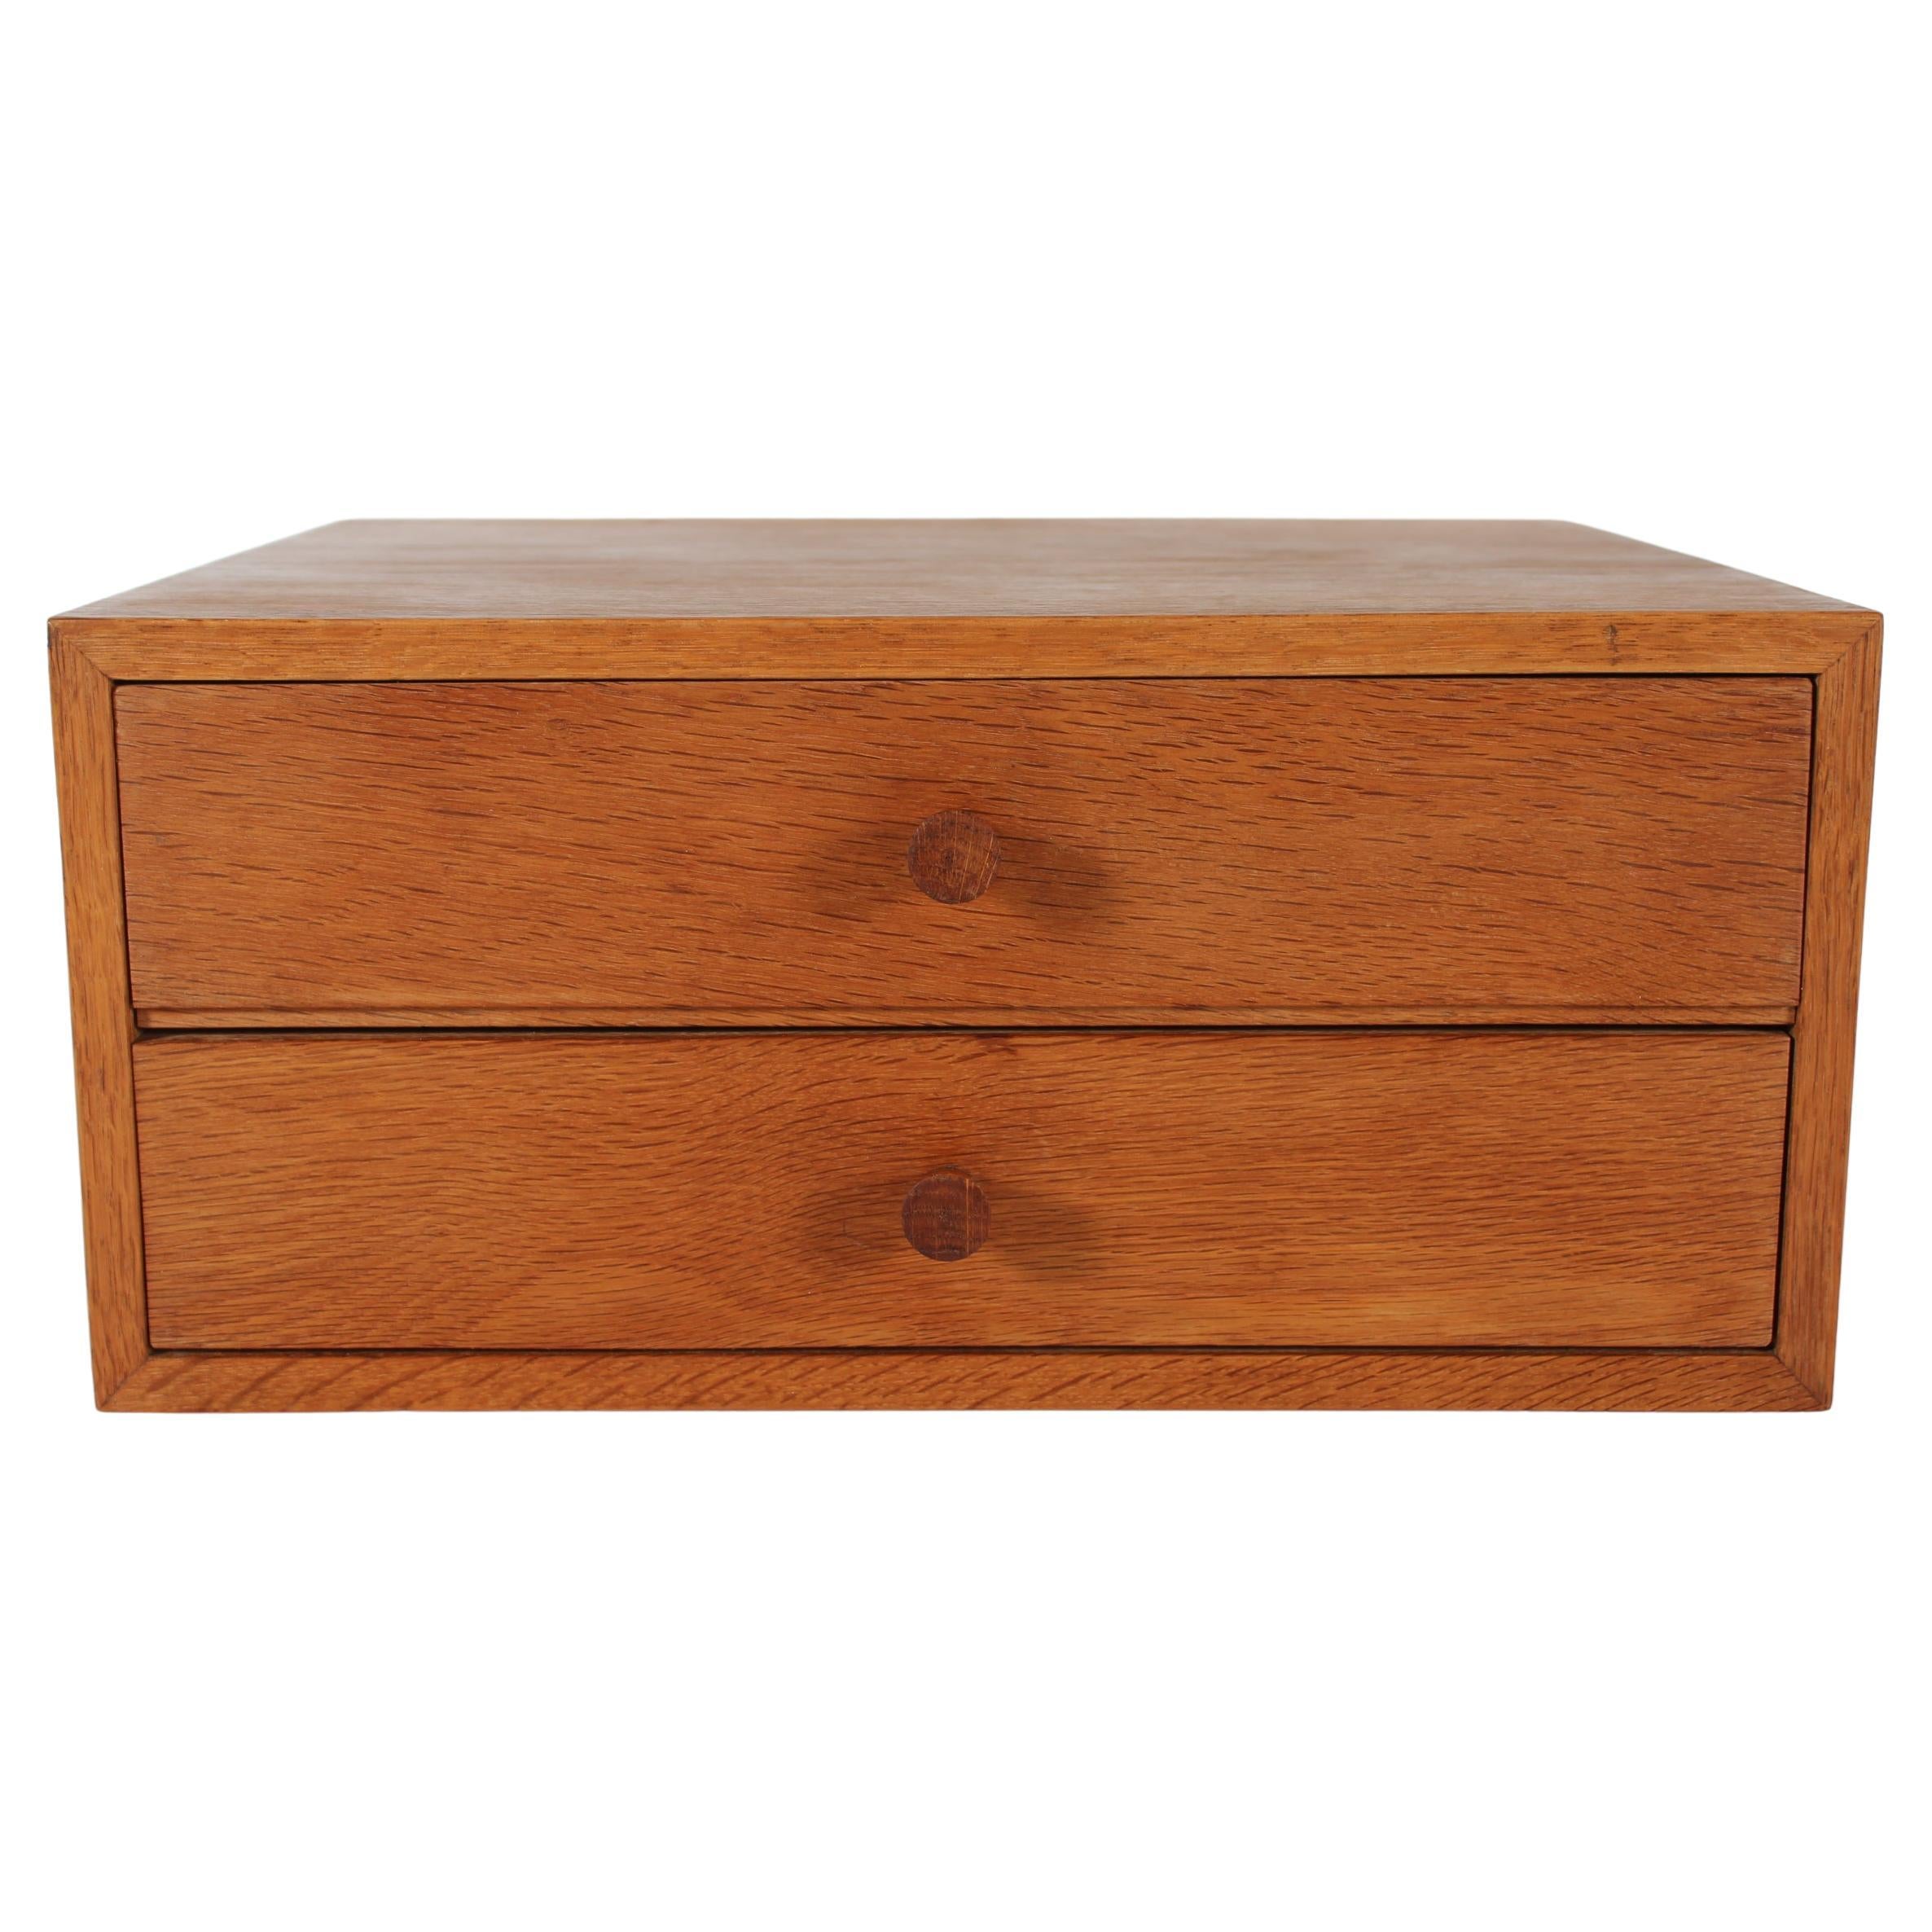 Danish Small Chest of Drawers File Cabinet Made from Oak Midcentury Modern 1960s